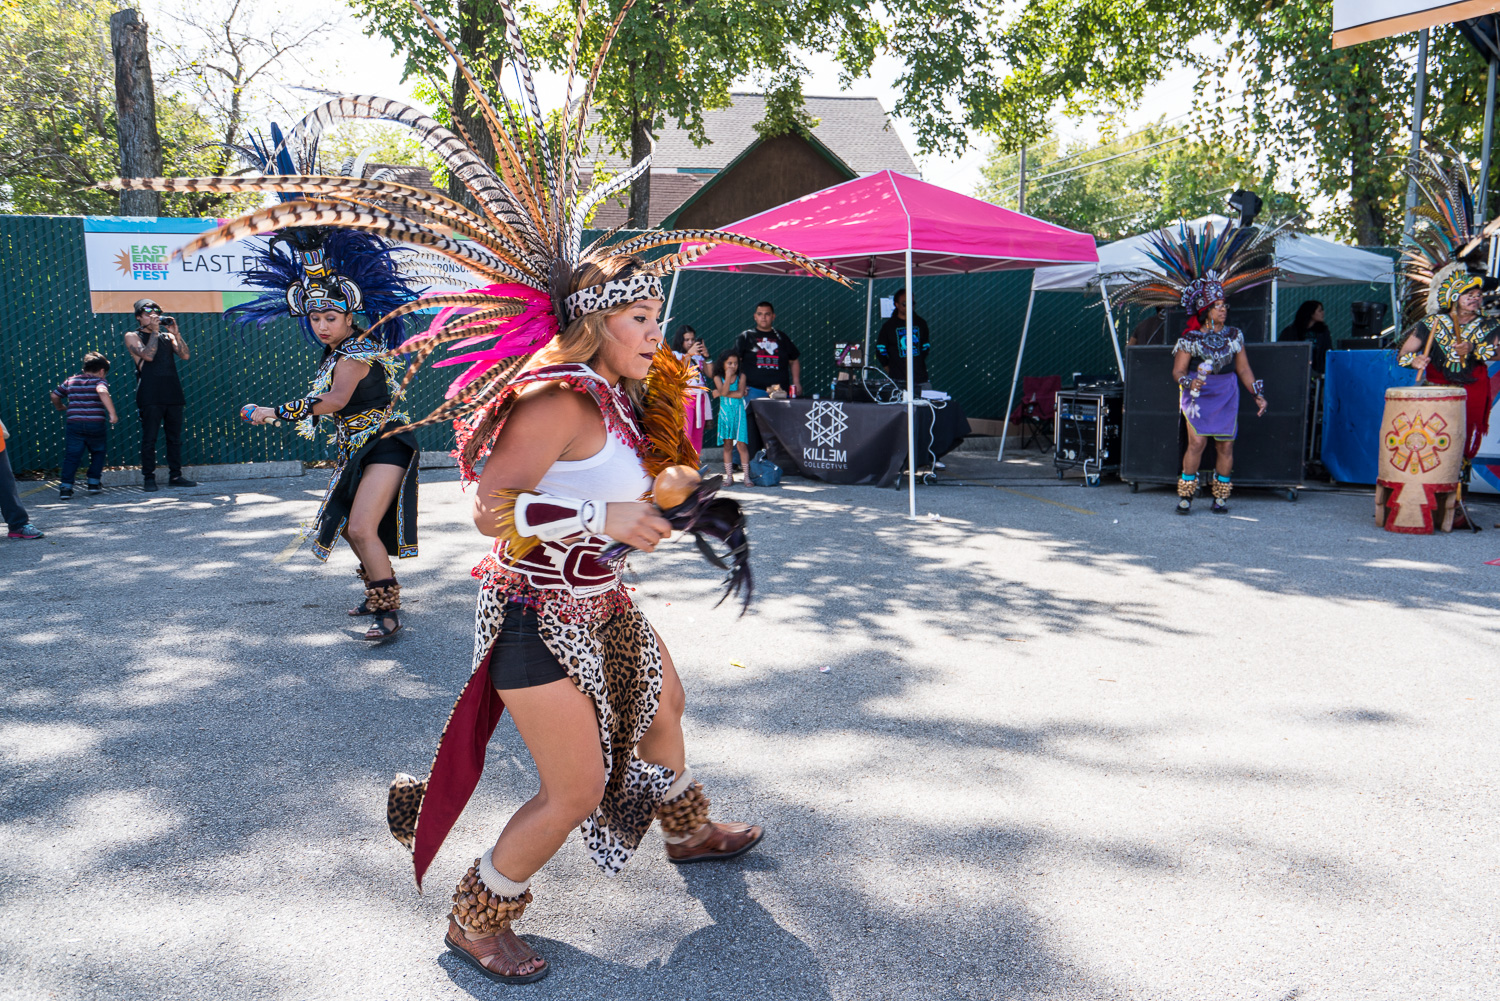 Video: Scenes from the 2015 East End Street Fest